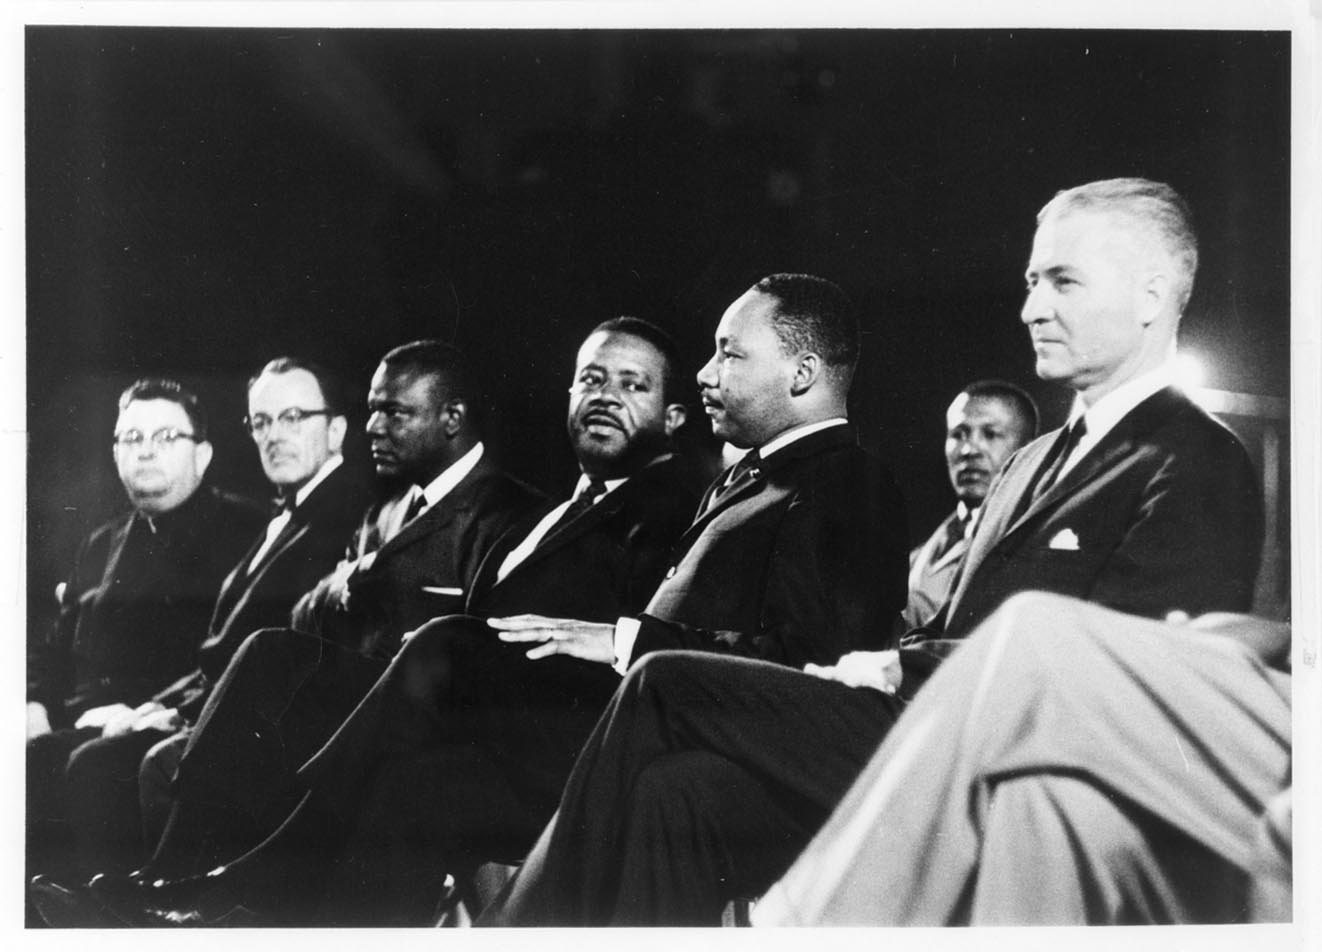 Martin Luther King Jr. at ASU in 1964